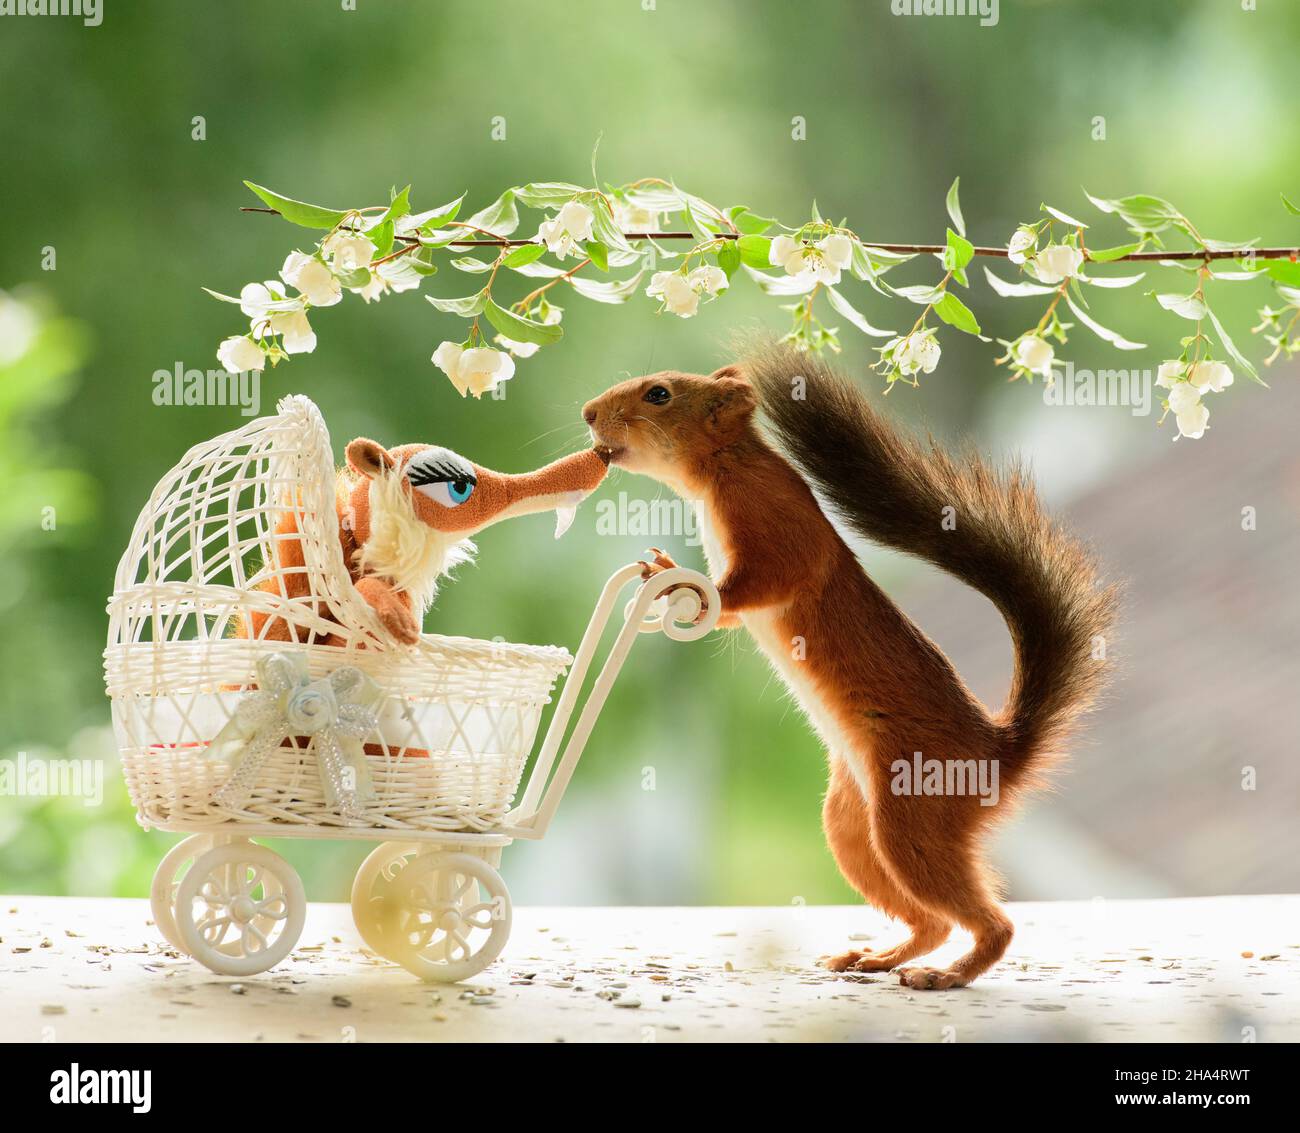 red squirrel is standing with an stroller under jasmine flowers Stock Photo